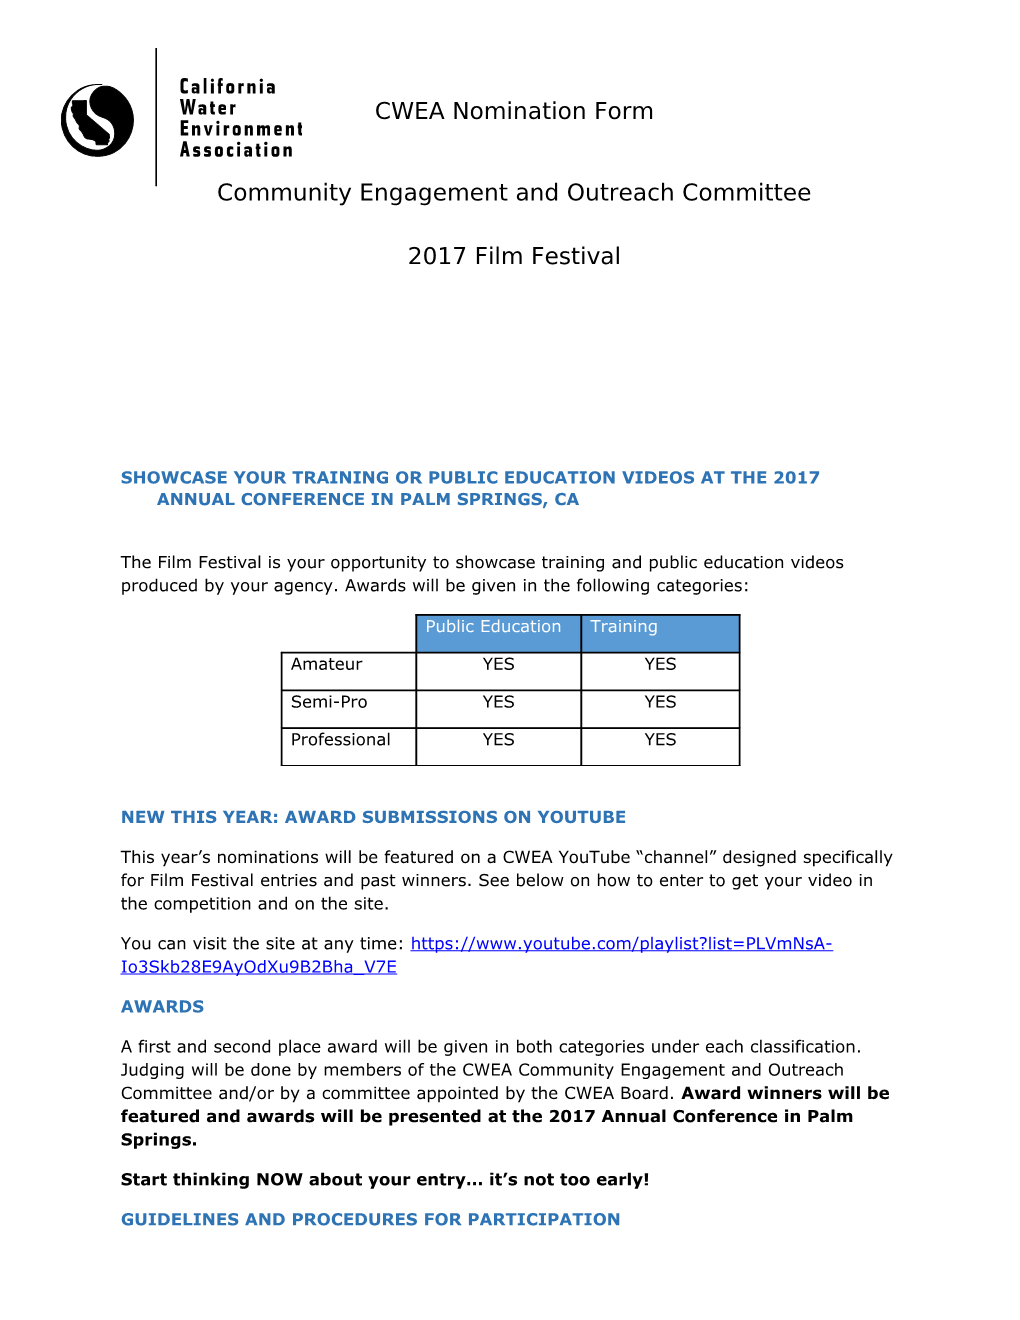 Community Engagement and Outreach Committee